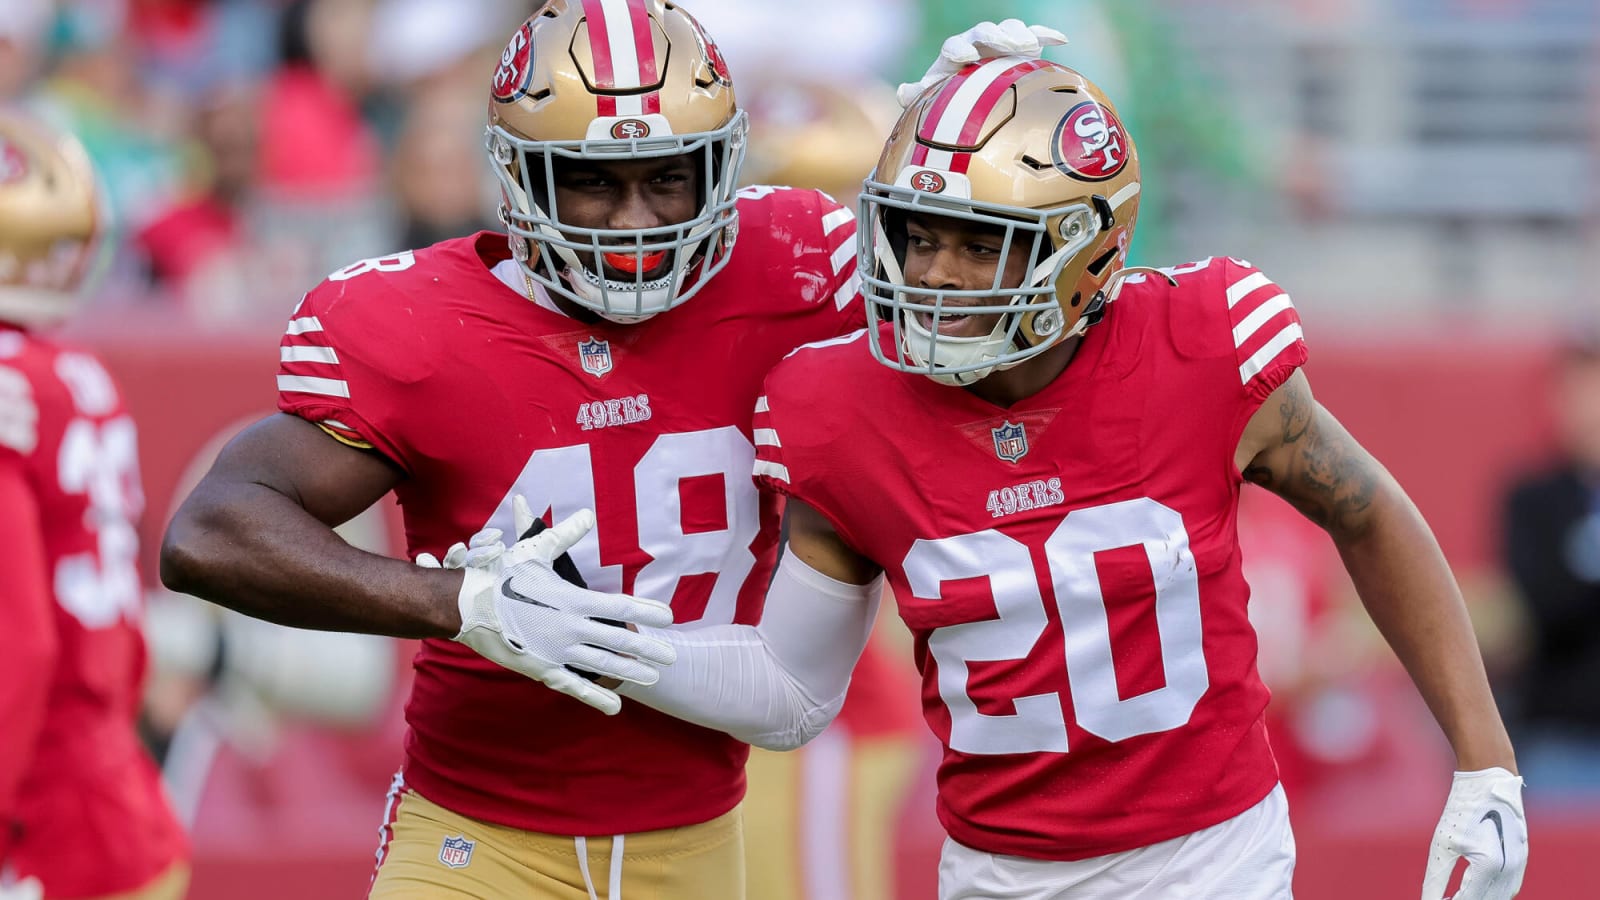 Standout players from Week 1 of 49ers preseason